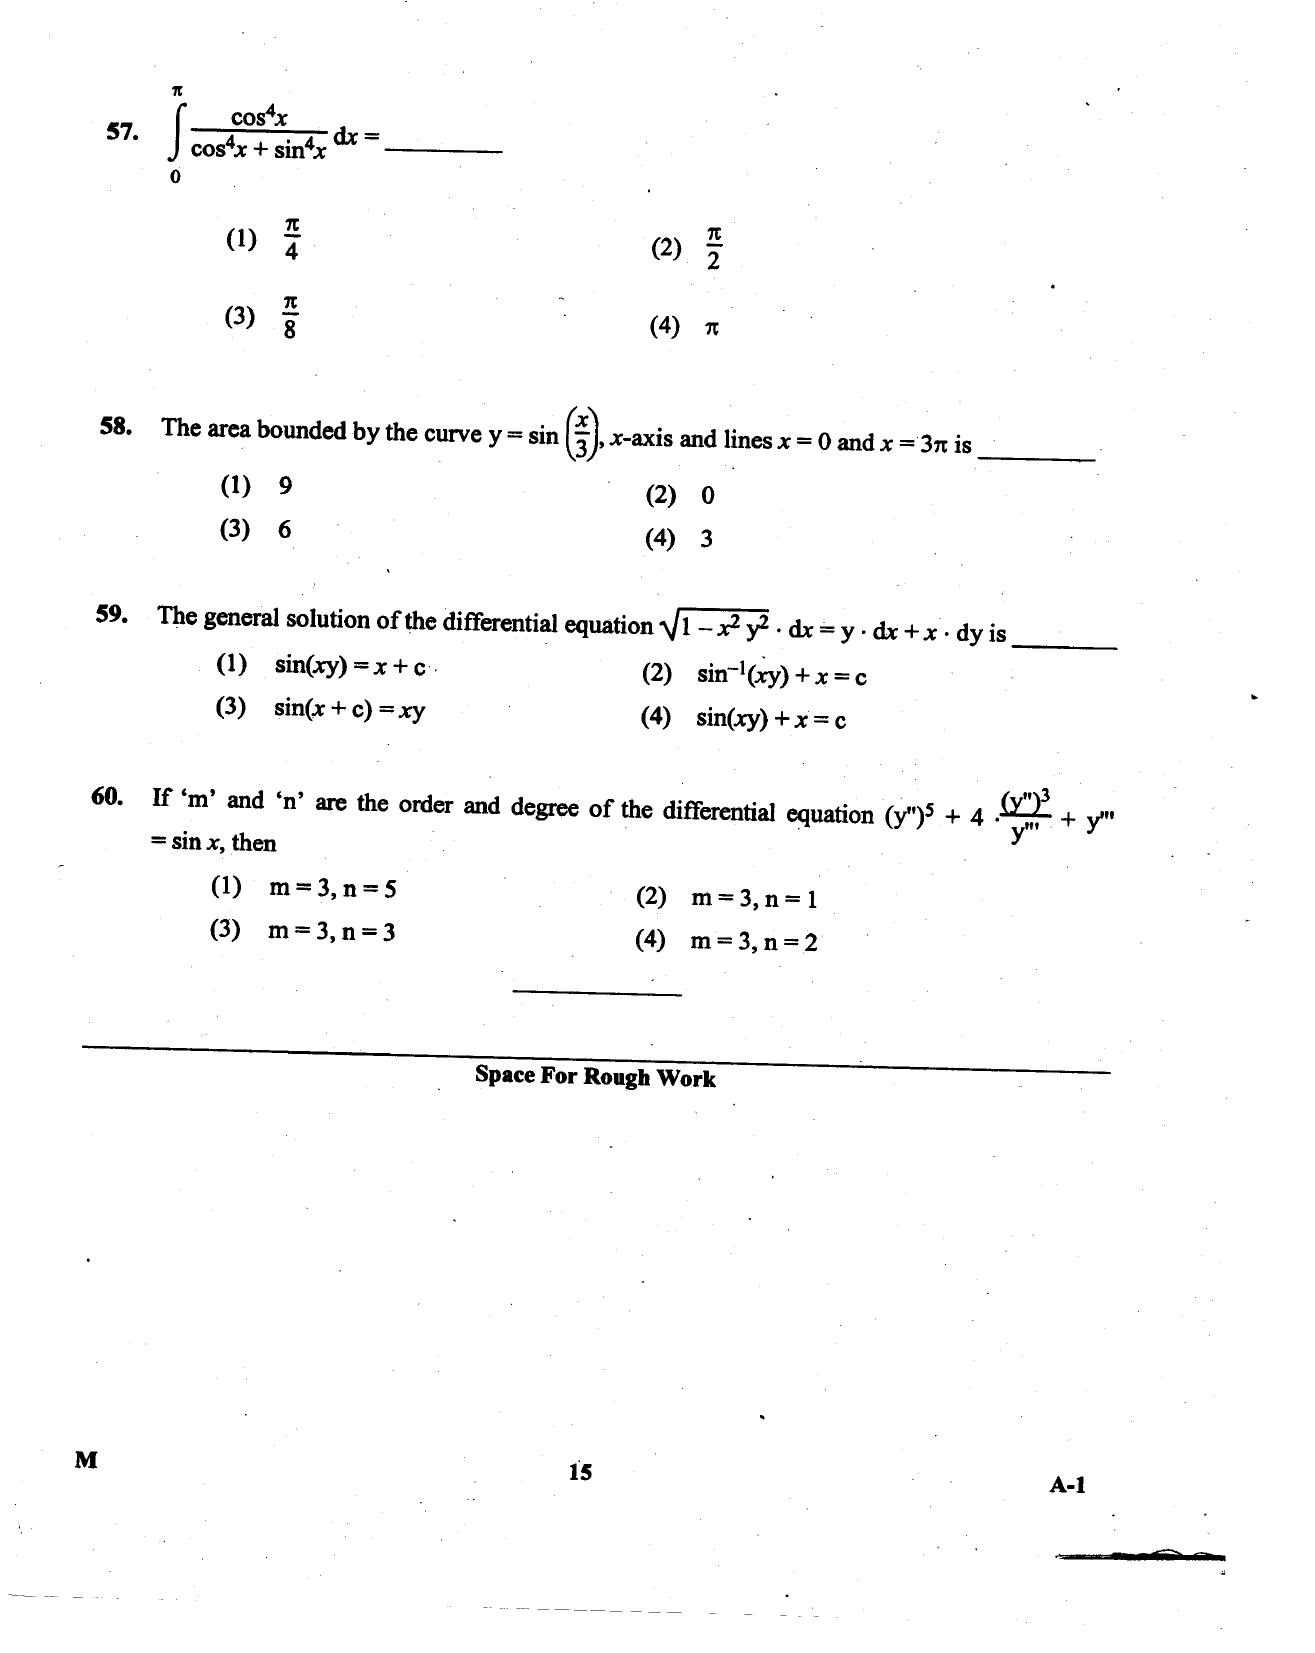 KCET Mathematics 2013 Question Papers - Page 15